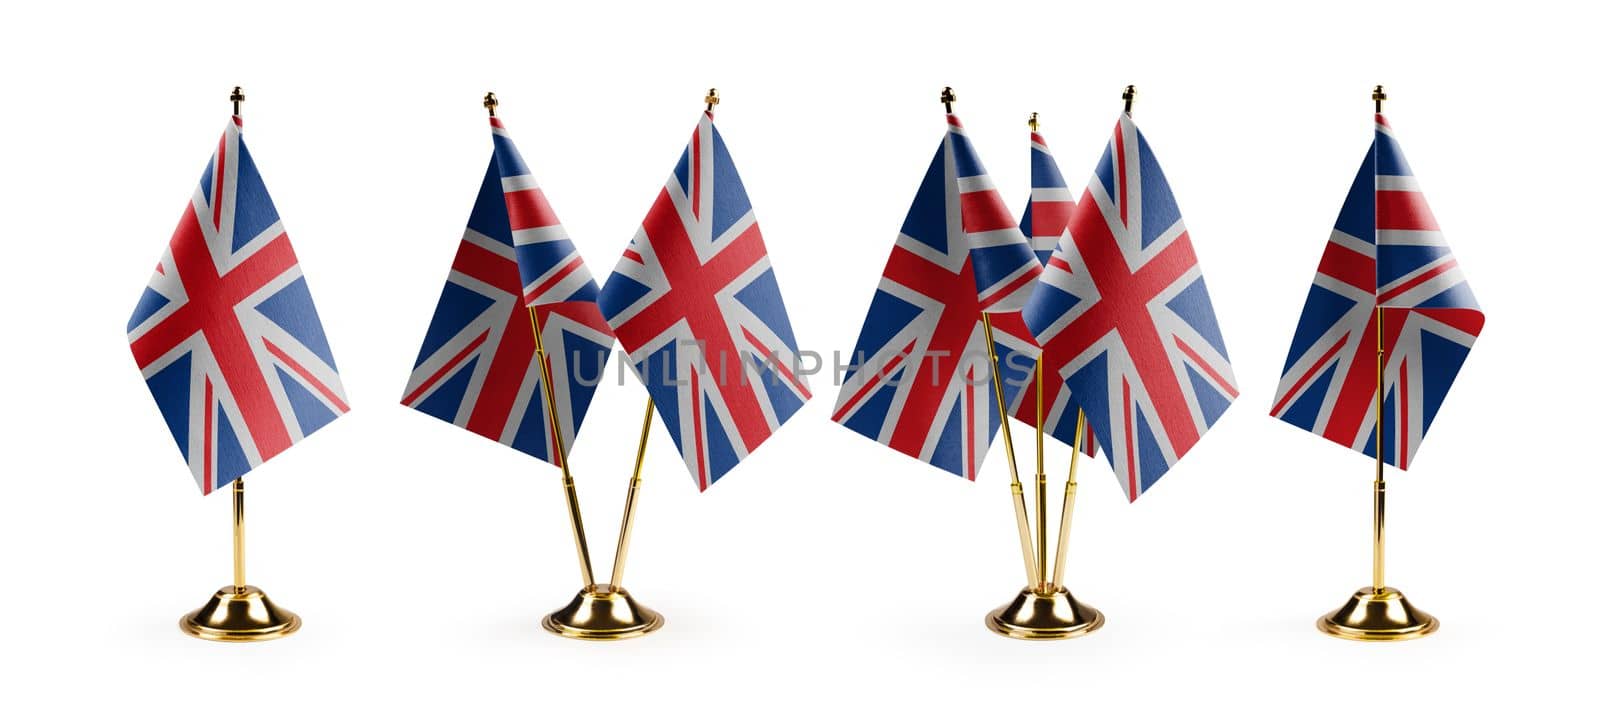 Small national flags of the United Kingdom on a white background by butenkow